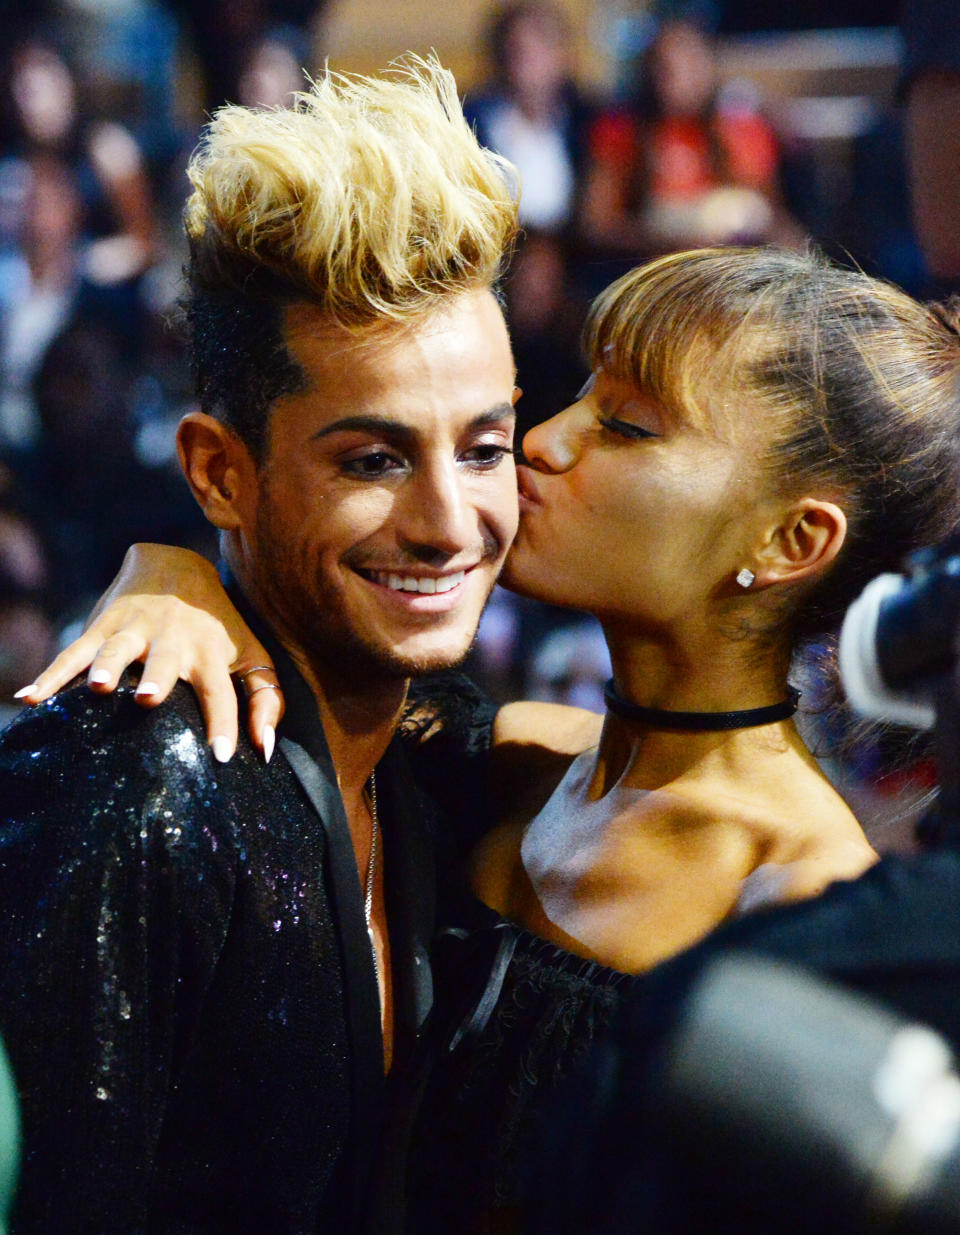 Frankie and Ariana Grande at the 2016 MTV Video Music Awards. (Photo: Getty Images/FilmMagic)